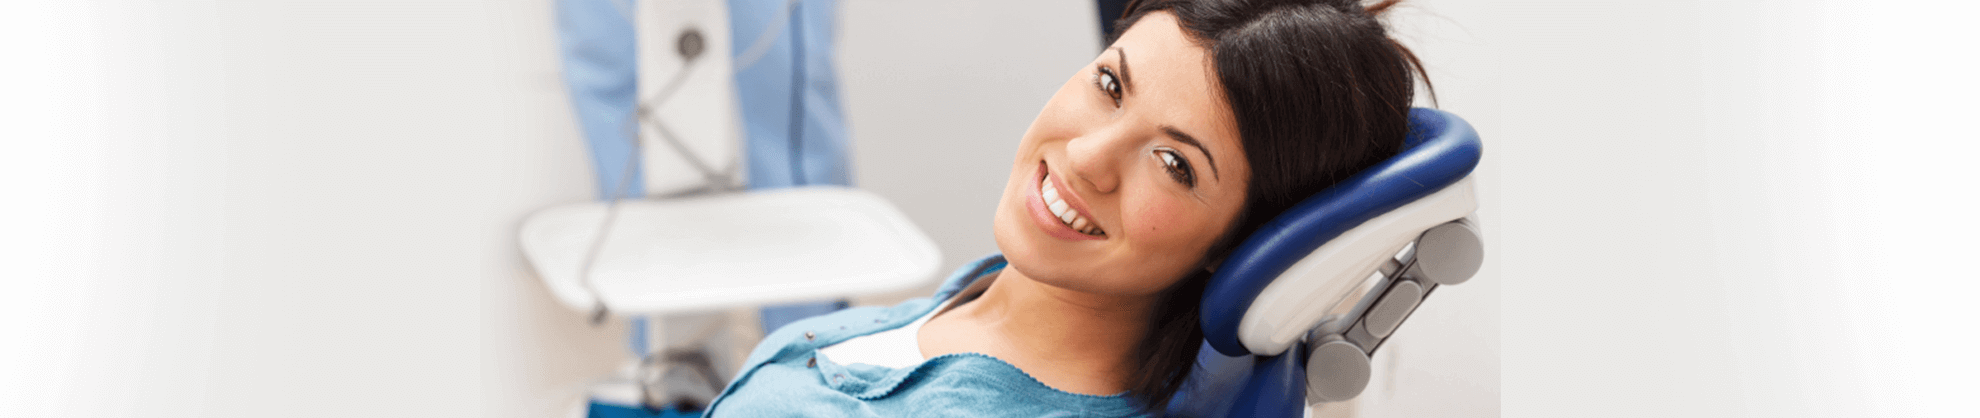 Root Canal Treatment in Snoqualmie